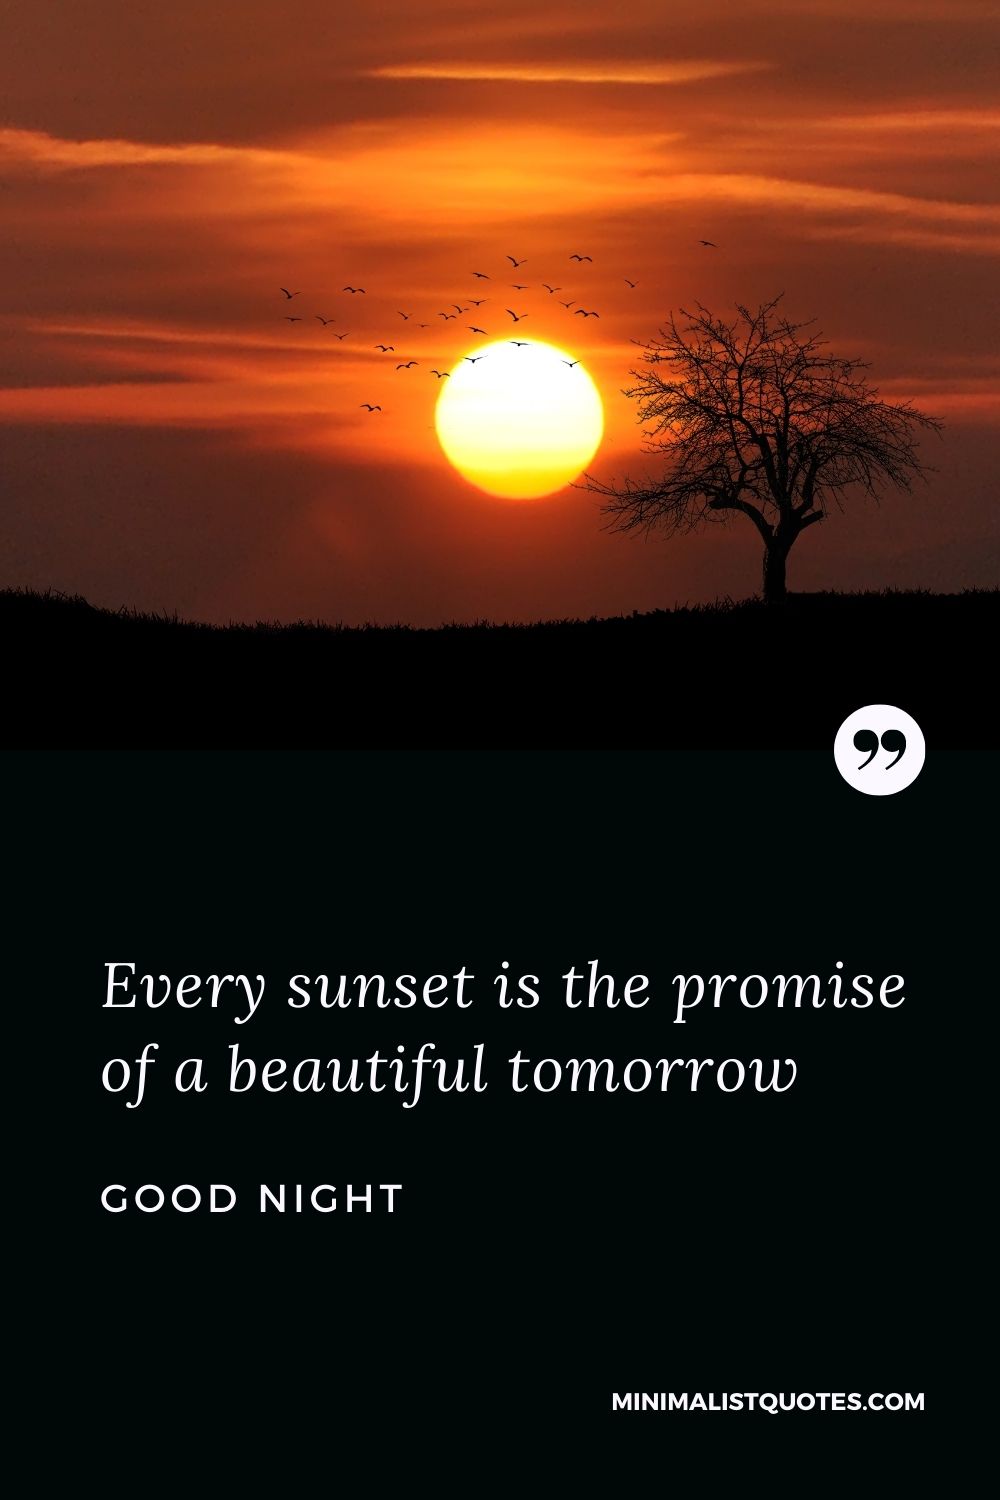 Good Night Wish & Message With Image: Every sunset is the promise of a beautiful tomorrow.